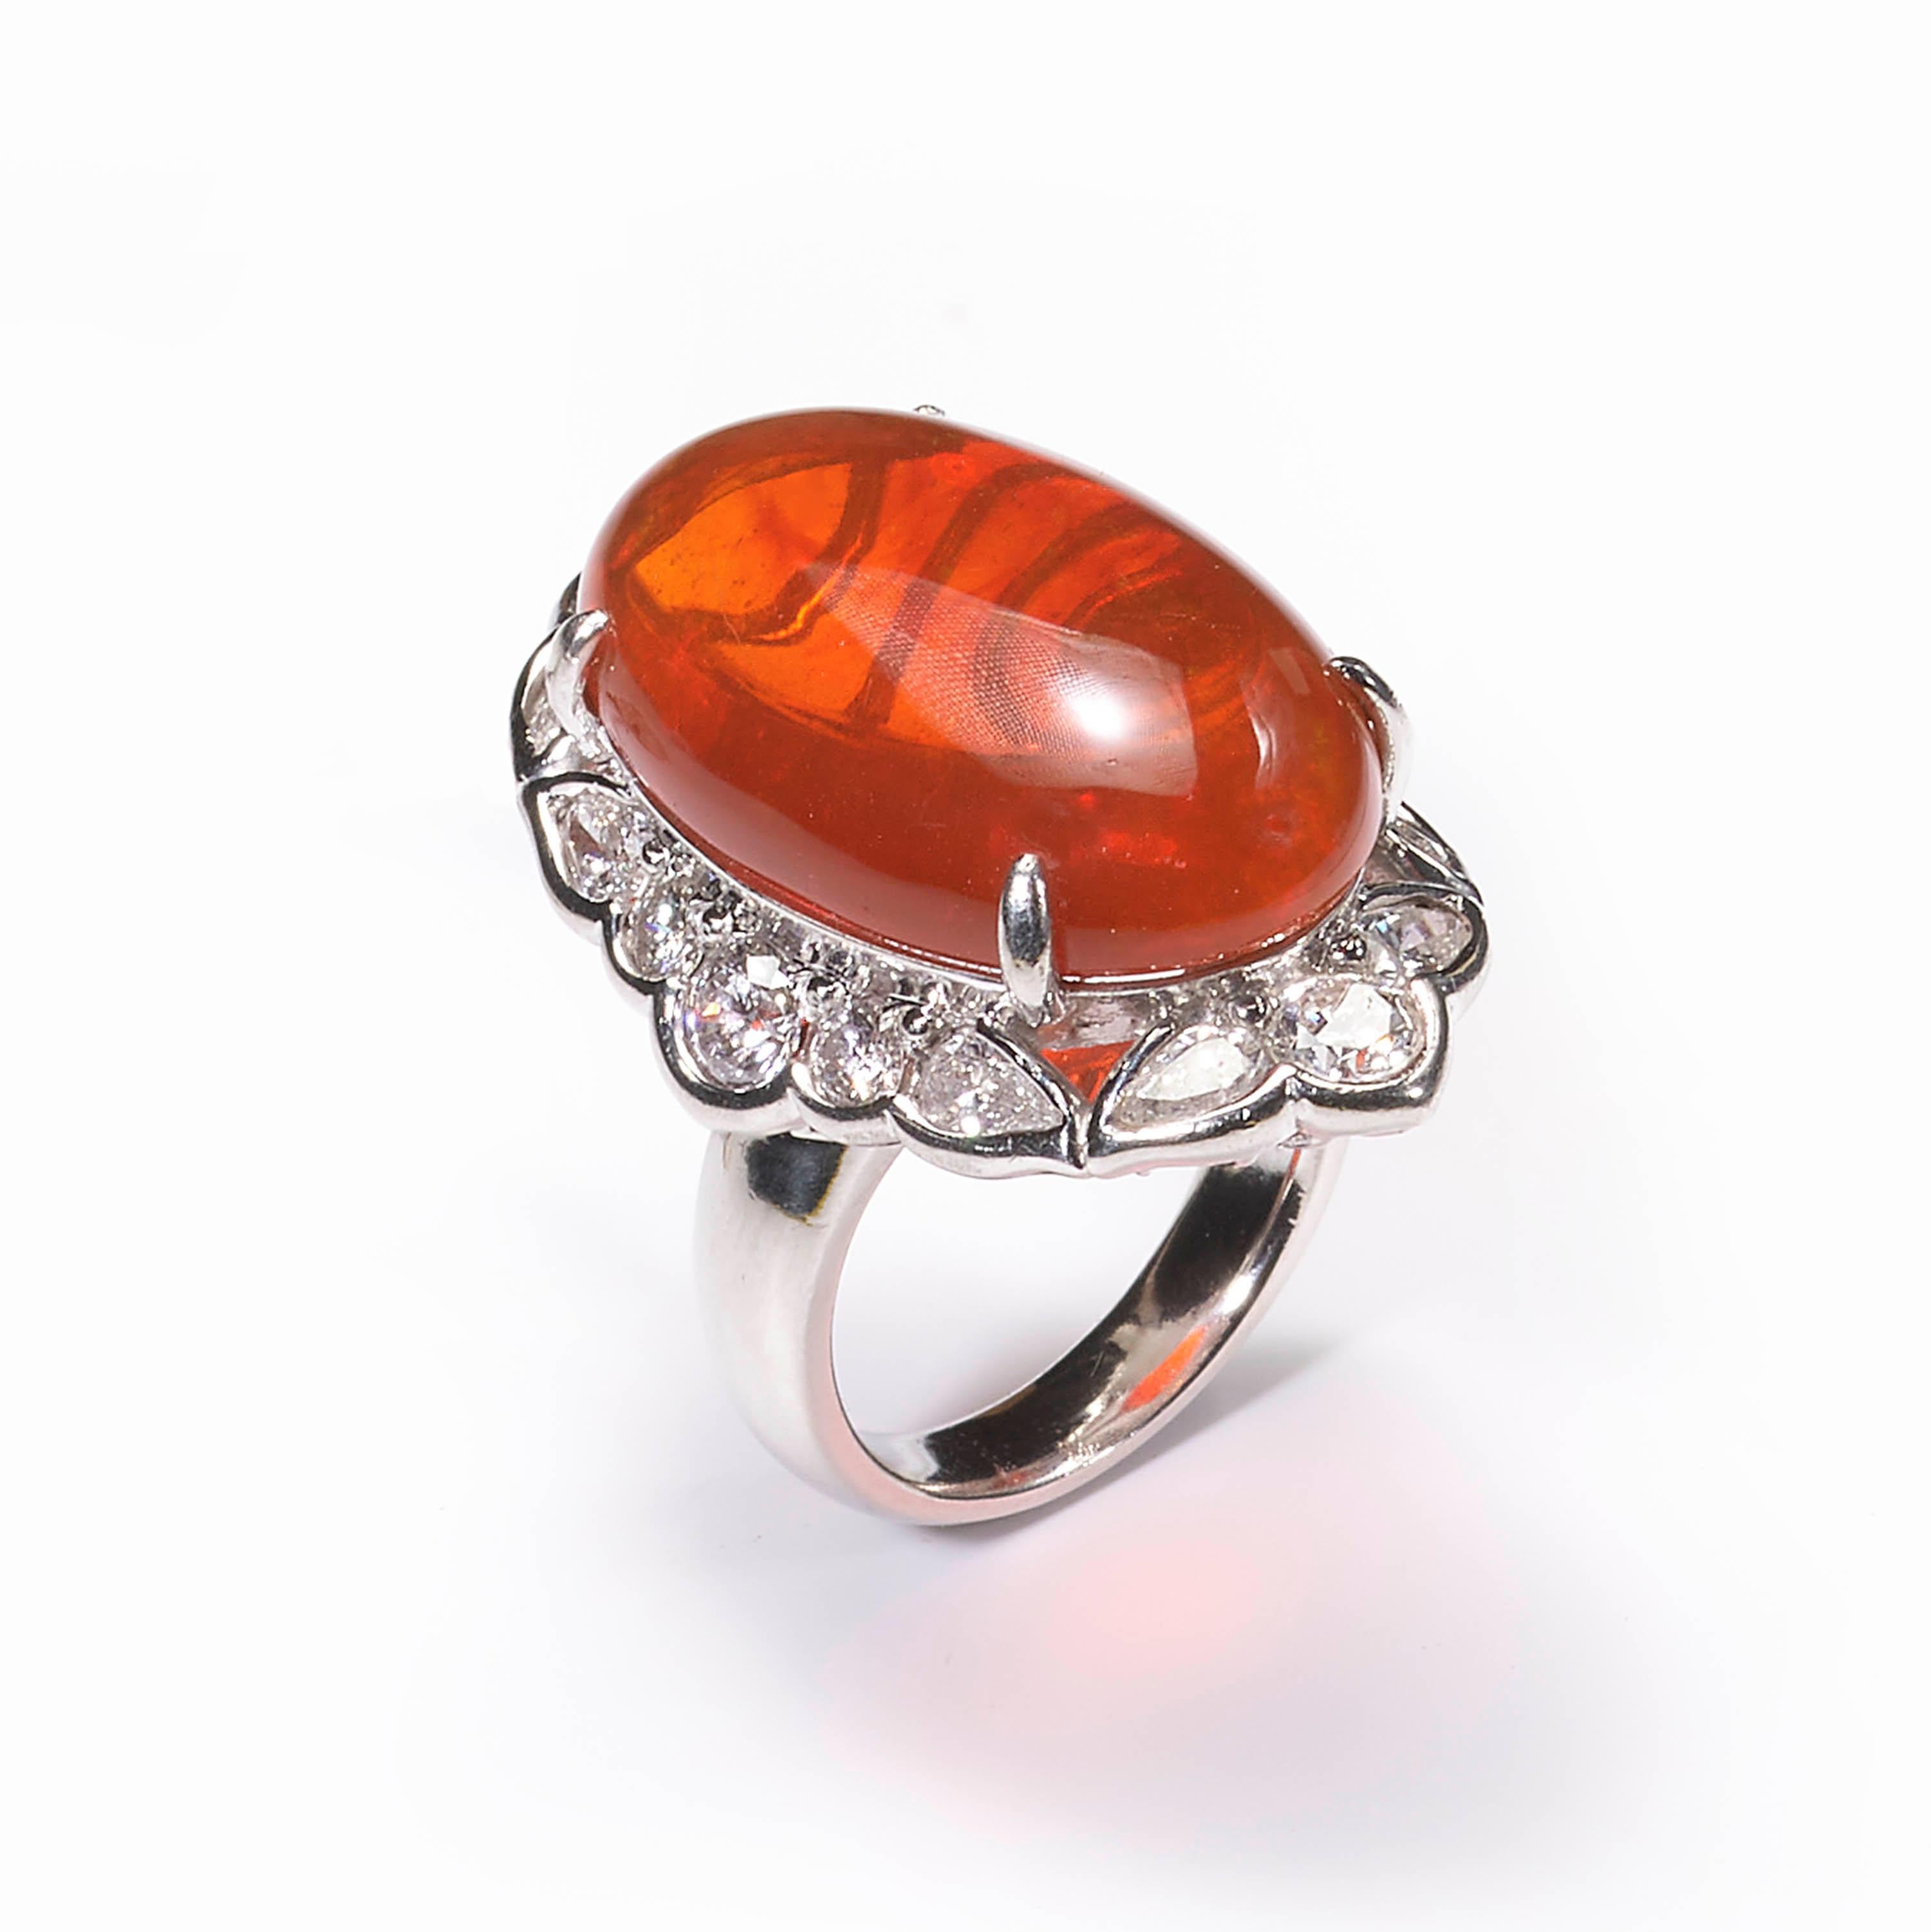 A modern fancy cluster ring, set with a central oval shaped cabochon-cut fire opal, weighing an estimated 18.00 carats, surrounded by alternating round brilliant-cut diamonds and pear-cut diamonds, weighing an estimated total of 2.40 carats, all